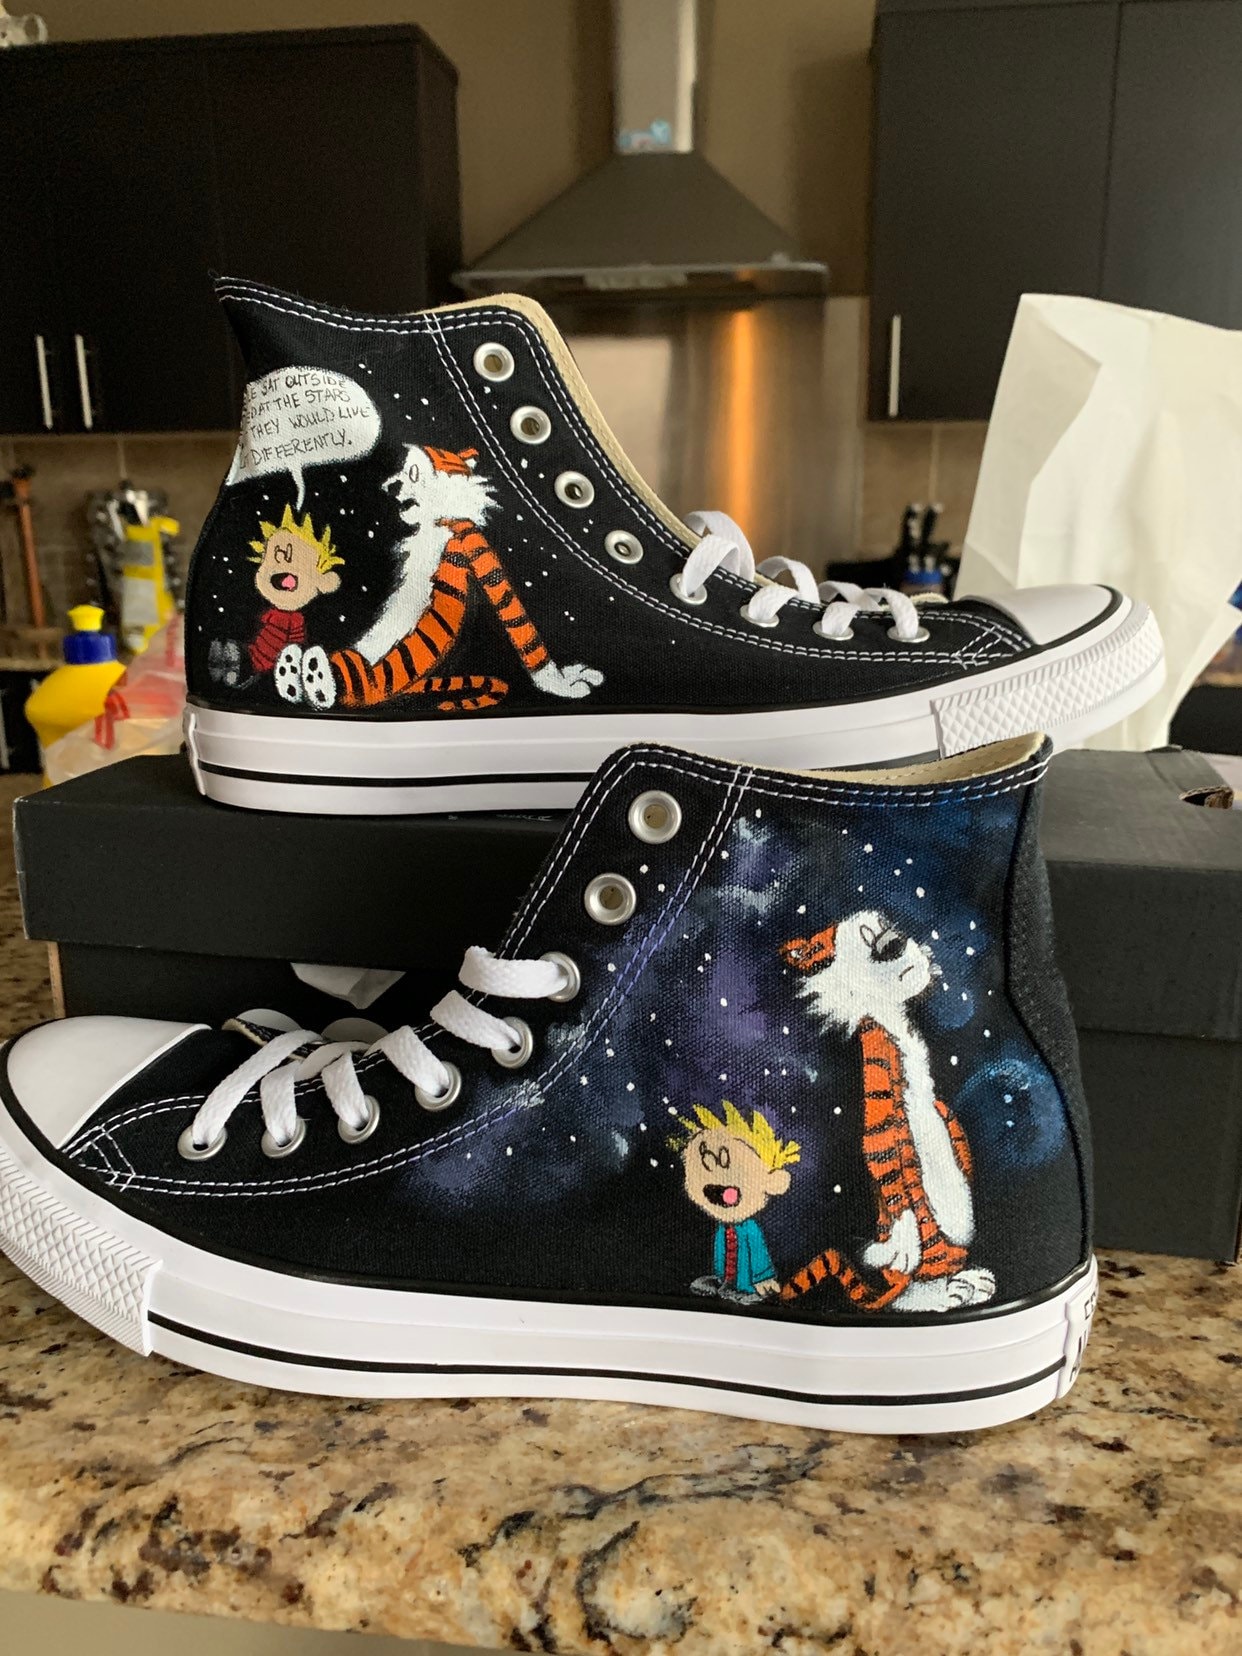 tørst plisseret Ræv Custom Painted Converse Inspired by Calvin and Hobbes - Etsy